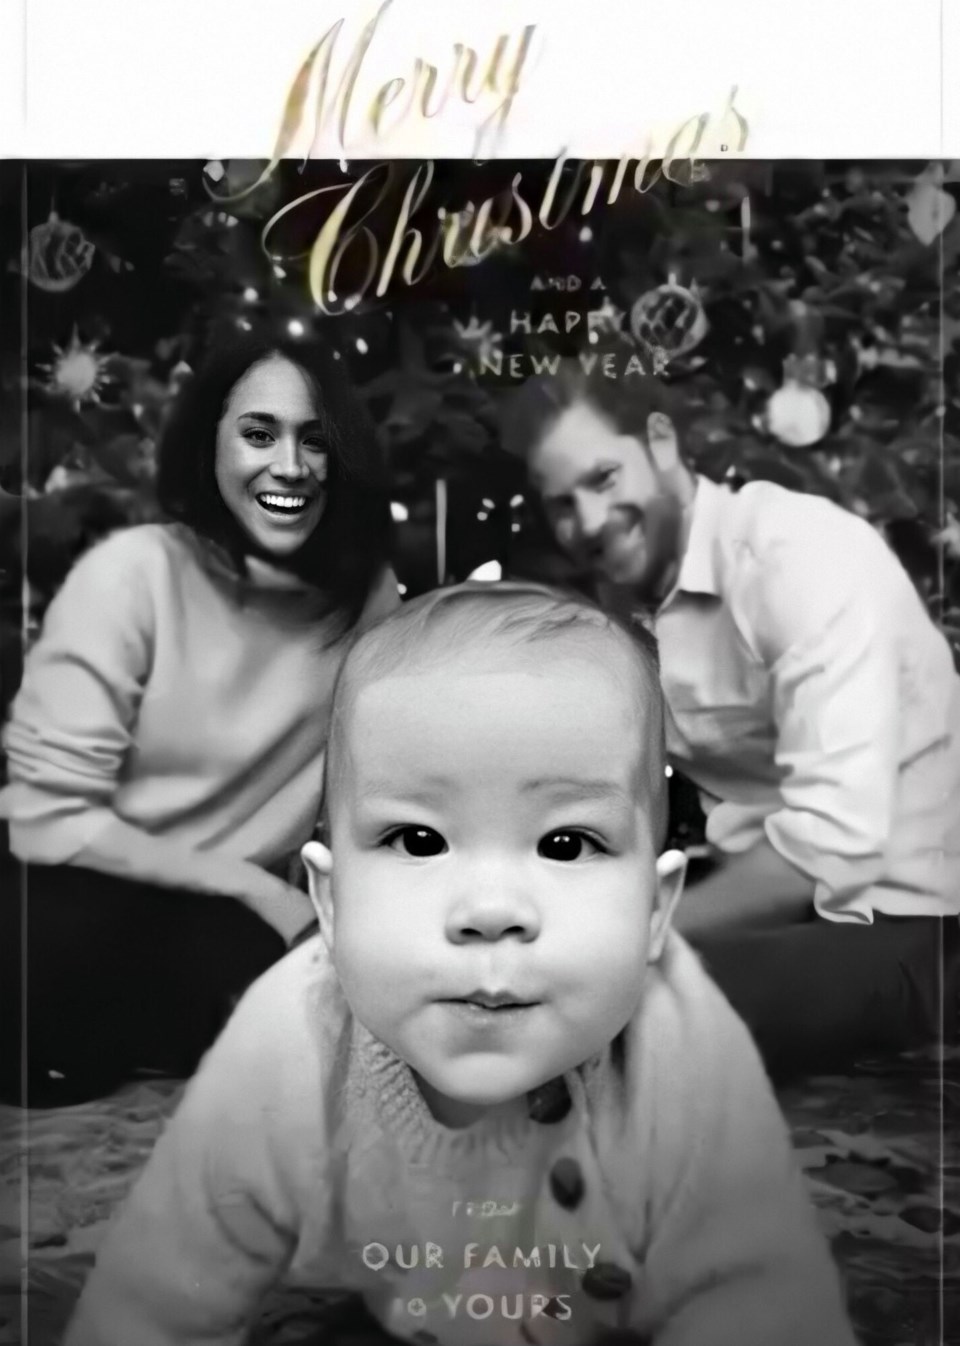 Meghan Markle, Prince Harry and Archie in December 2019 Christmas card